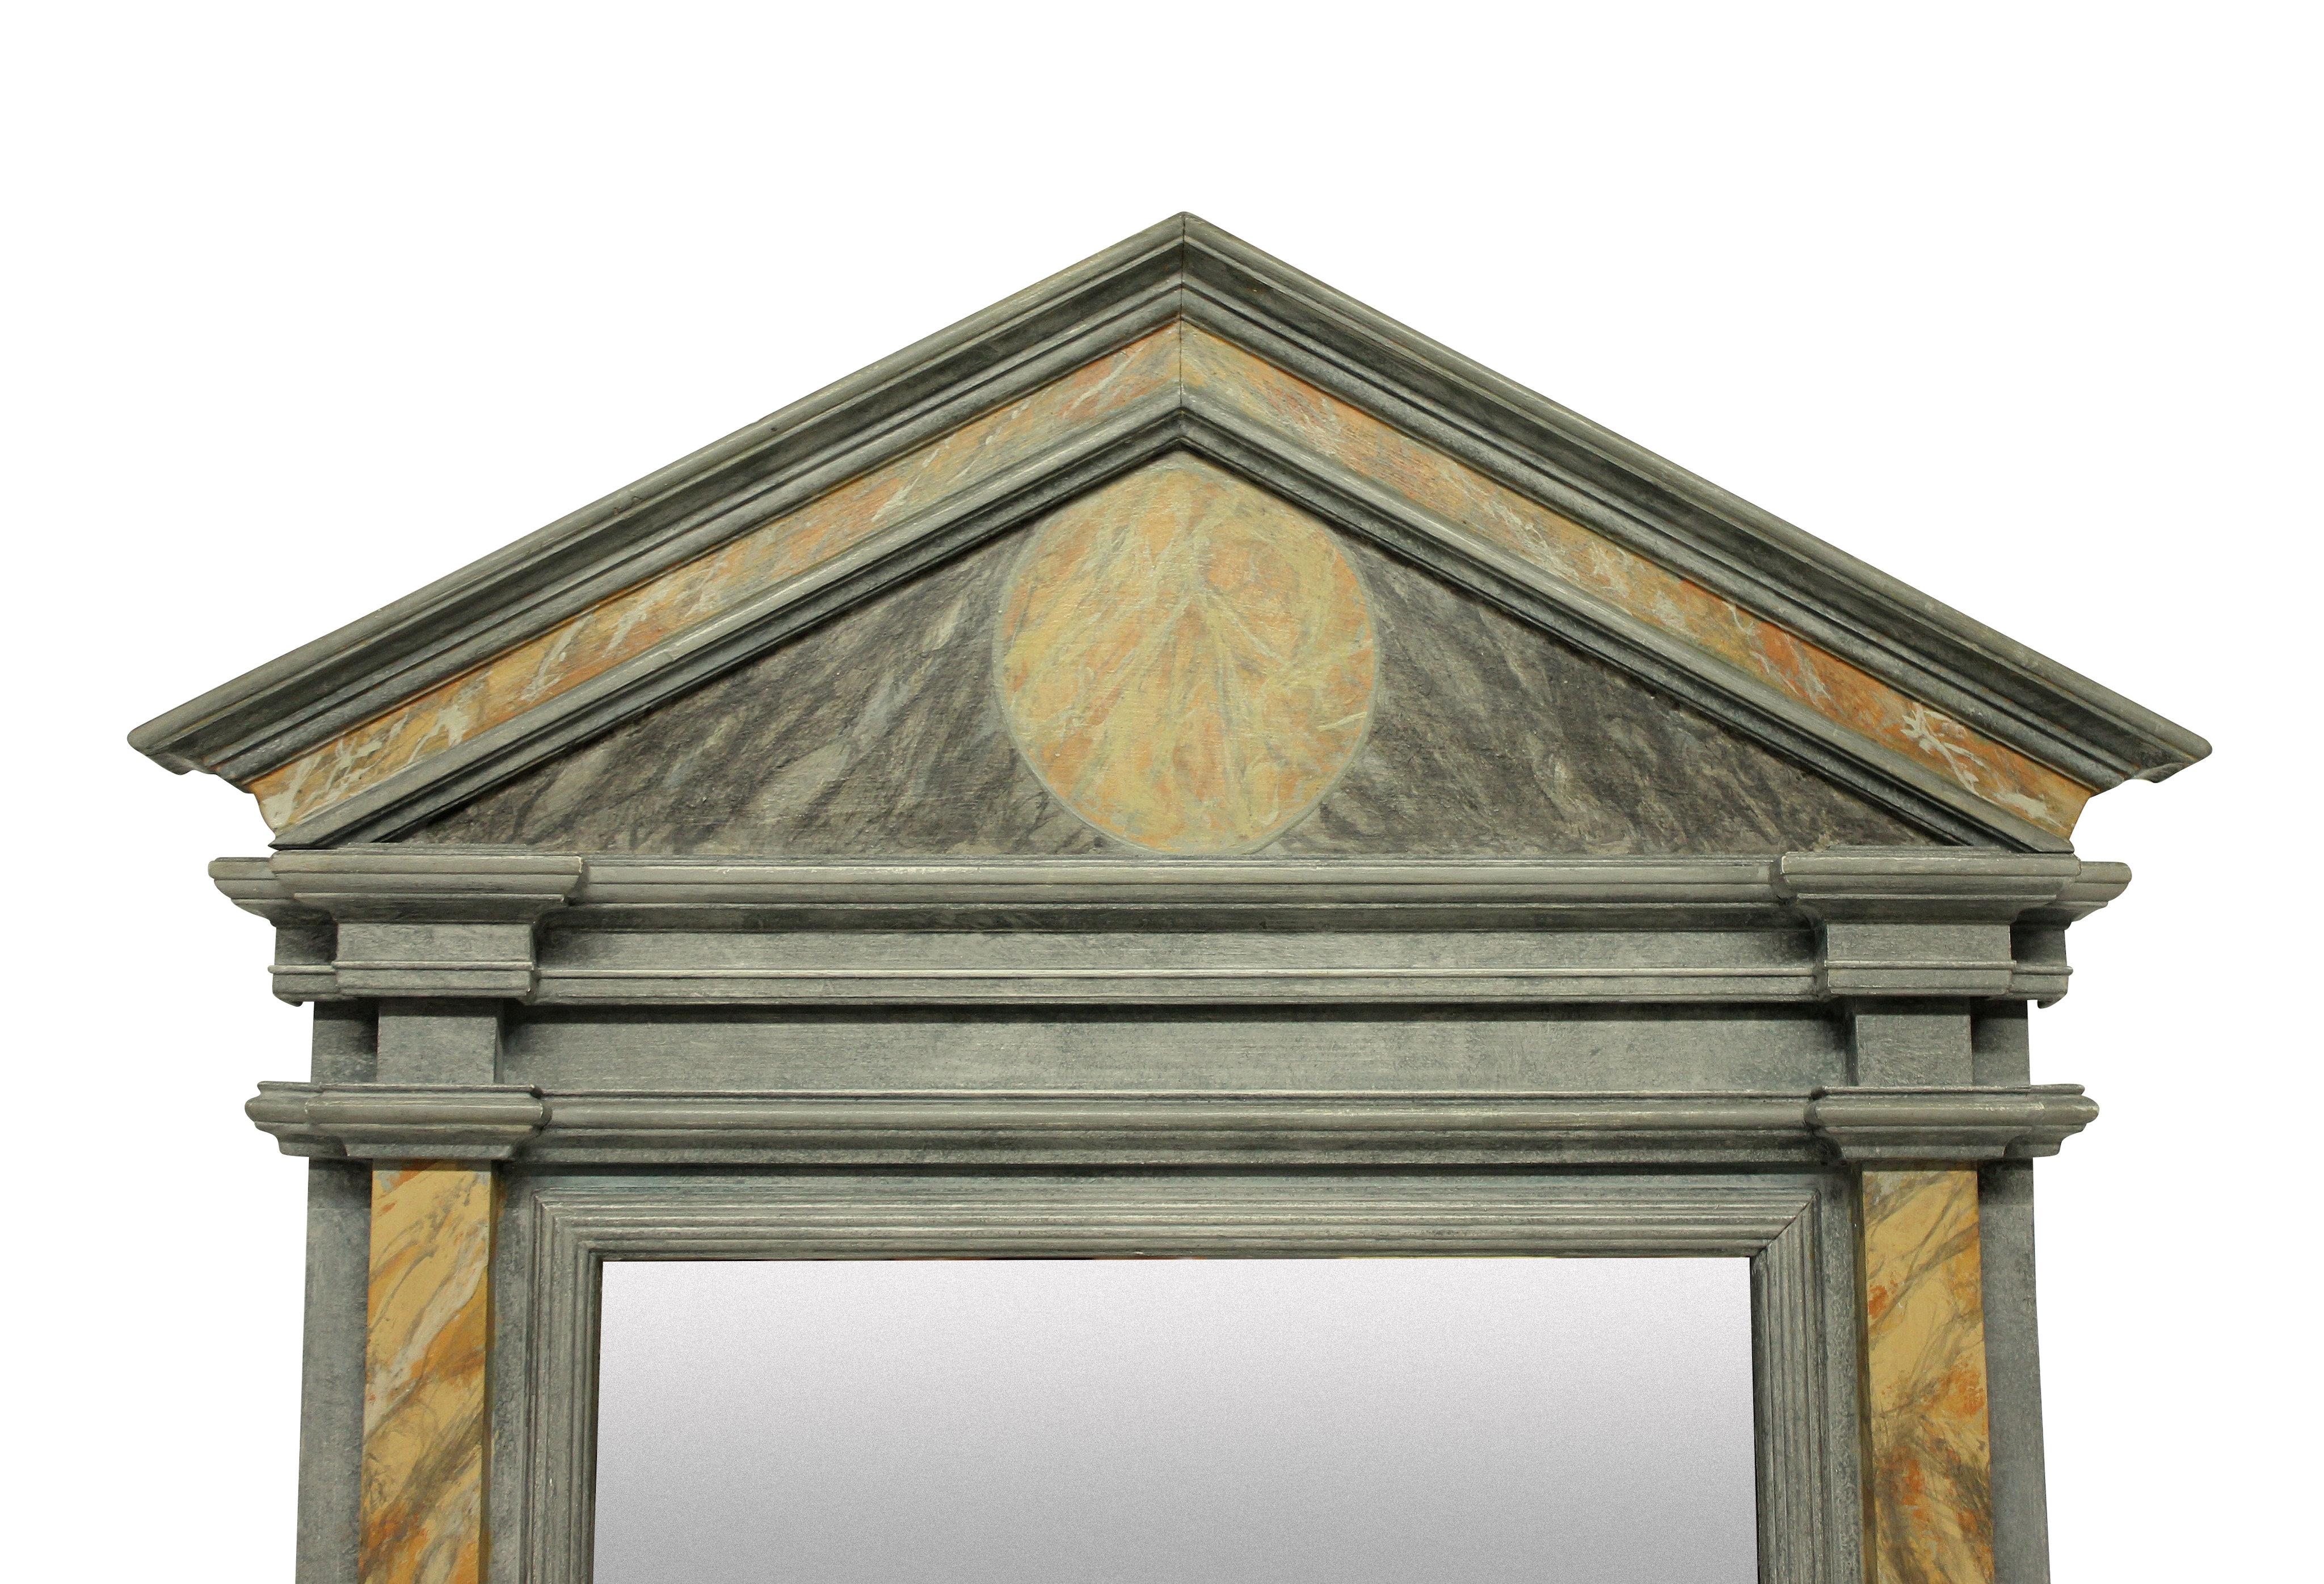 An English marbled architectural Roman style mirror, with faux Sienna and grey marbling and a bevelled mirror plate.